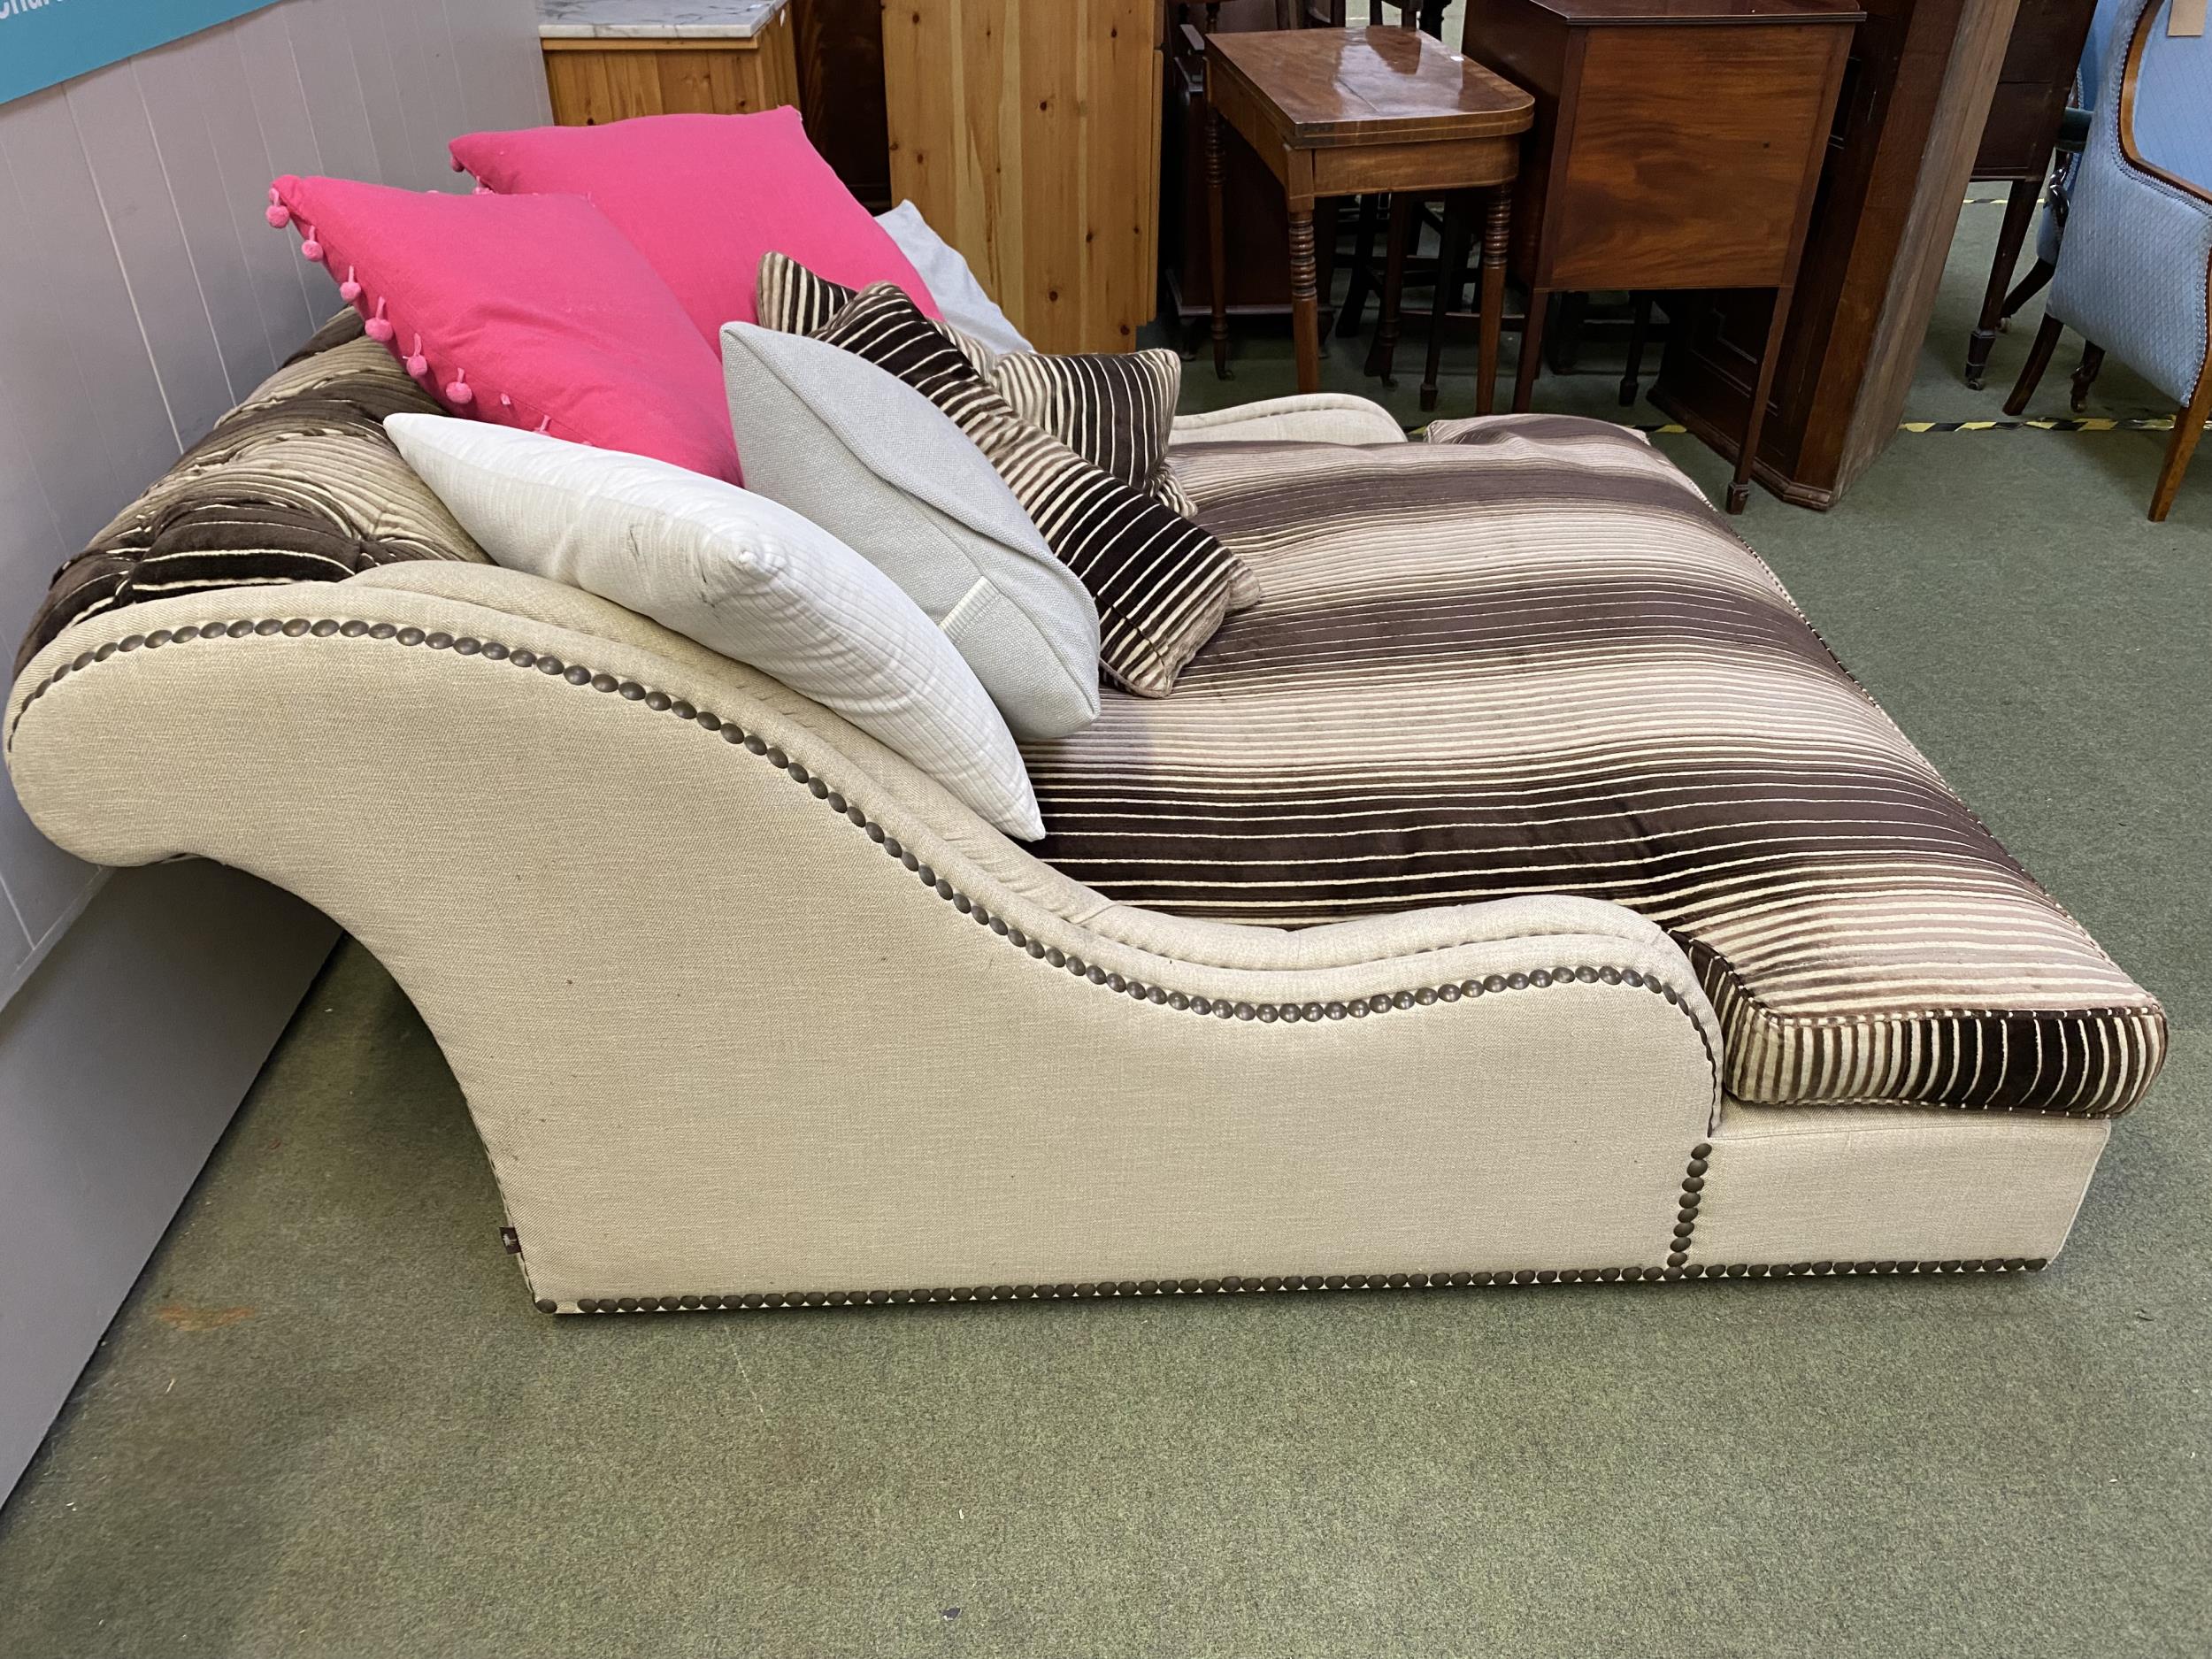 Large cream and button upholstered chaise longue/bed, with central striped upholstered cushion, - Image 3 of 4